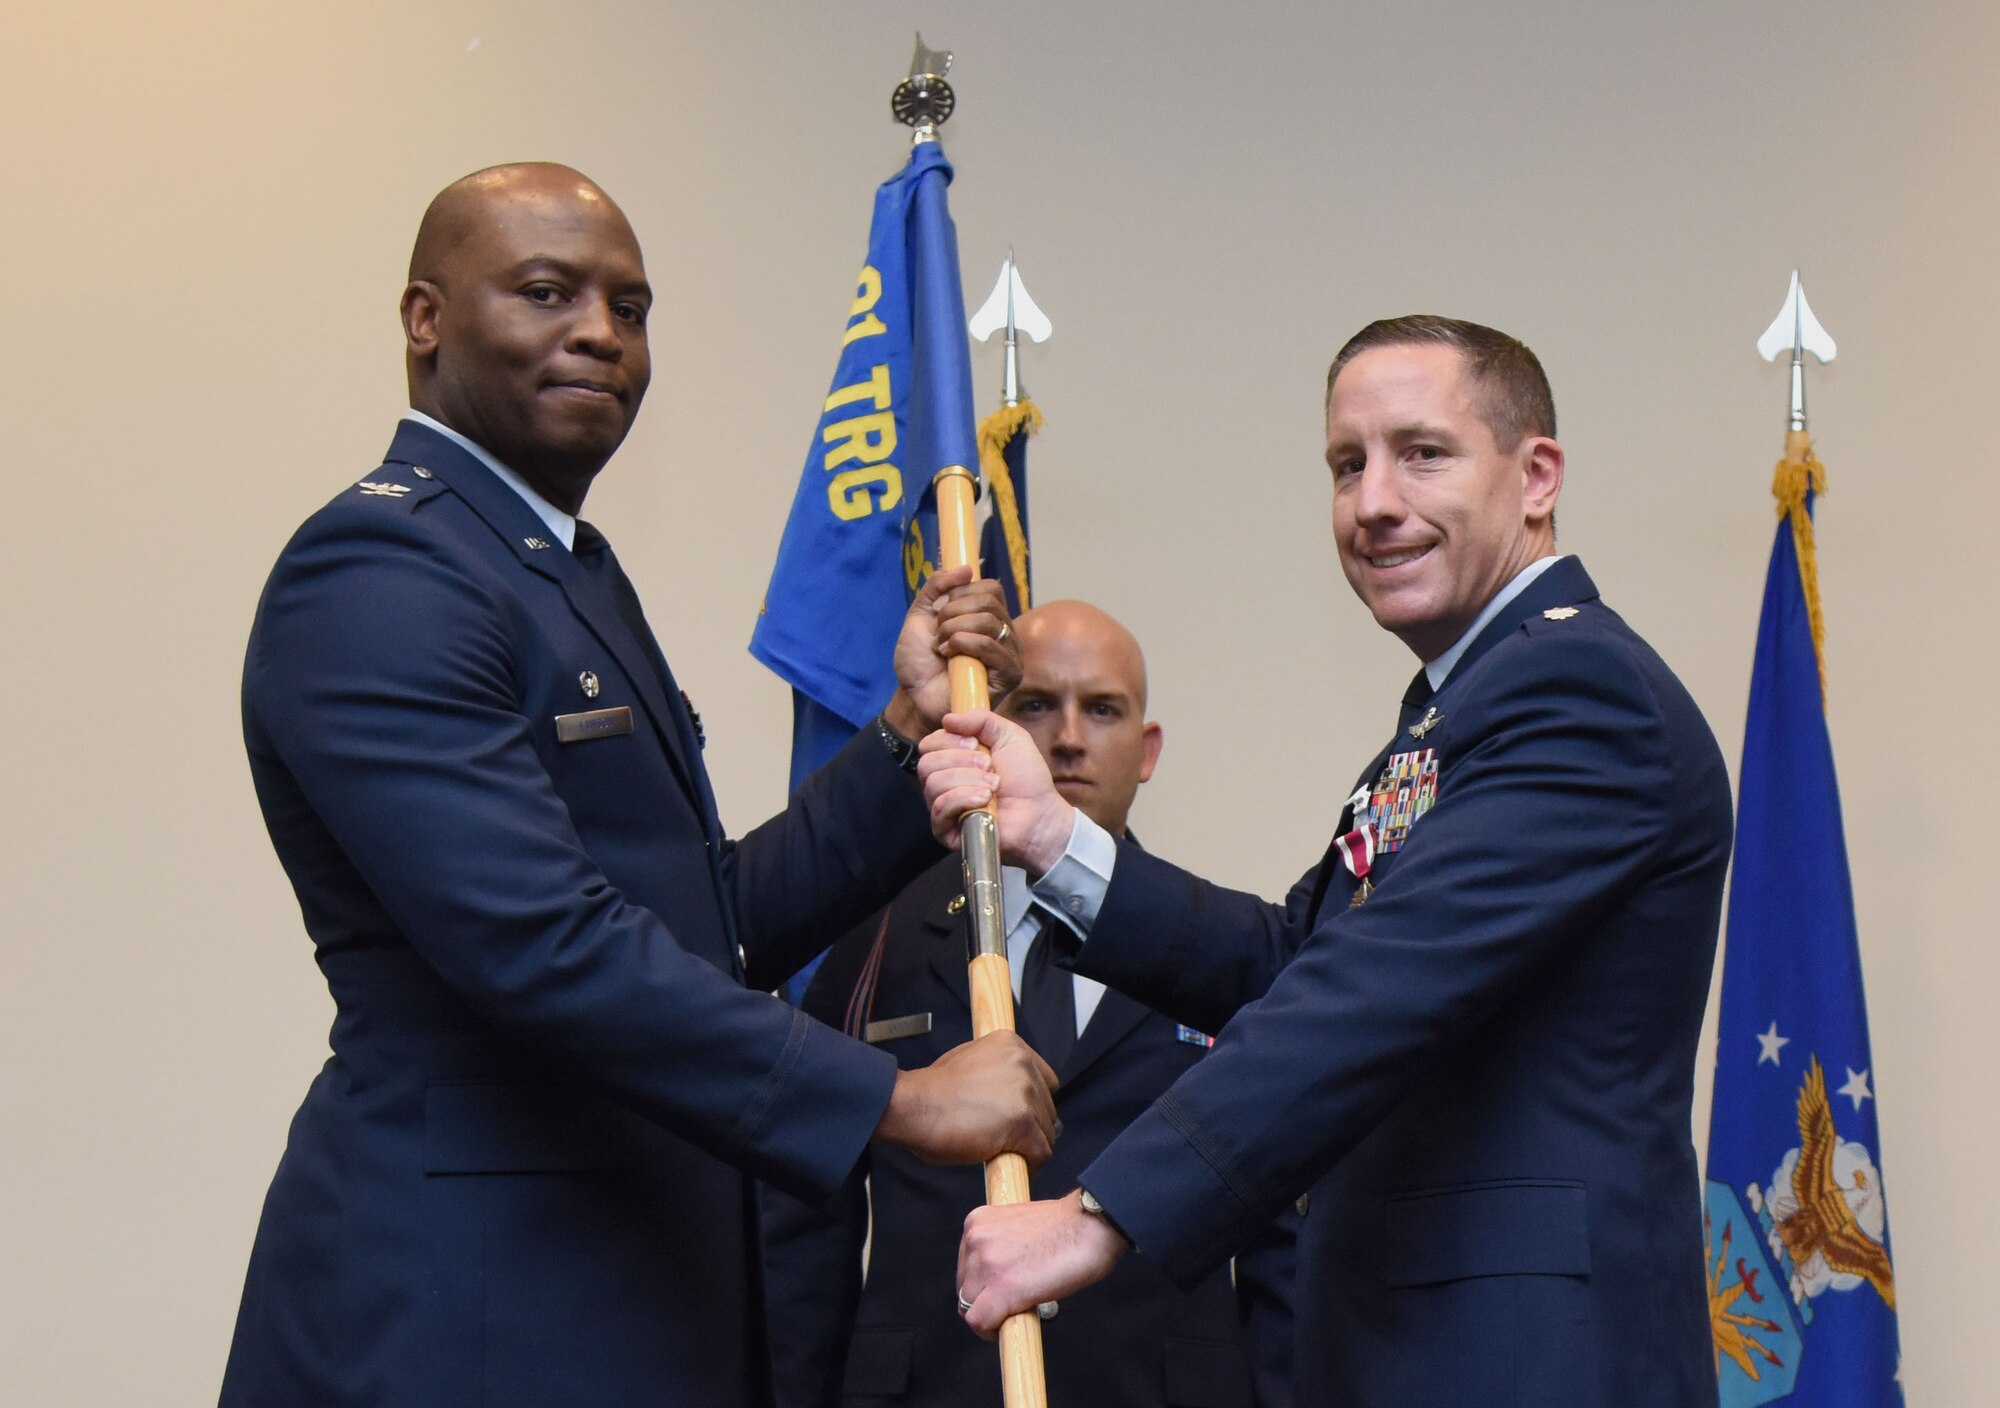 U.S. Air Force Col. Leo Lawson, Jr., 81st Training Group commander, takes the 338th Training Squadron guidon from Lt. Col. Michael Zink, outgoing 338th TRS commander, during the 338th TRS change of command ceremony in the Roberts Consolidated Aircraft Maintenance Facility at Keesler Air Force Base, Mississippi, July 26, 2018. The passing of the guidon is a ceremonial symbol of exchanging command from one commander to another. (U.S. Air Force photo by Kemberly Groue)